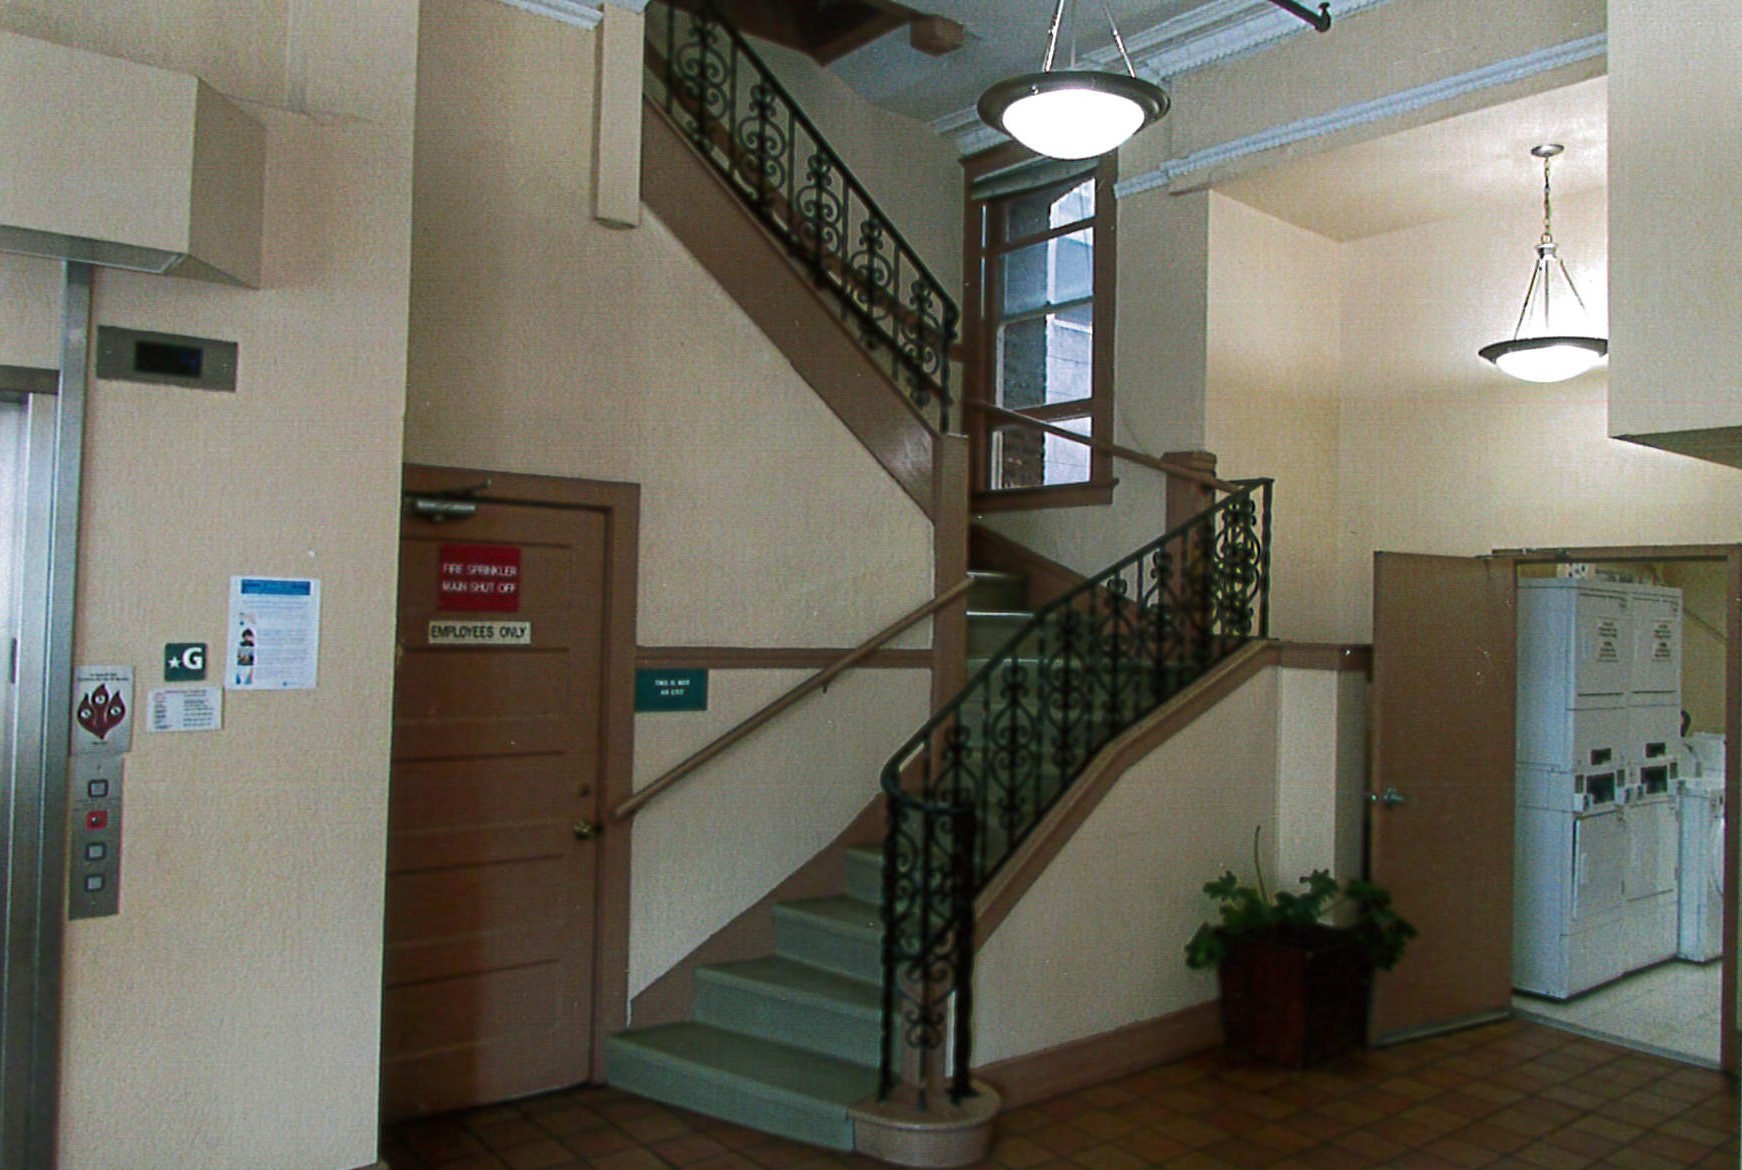 Lobby main stairs, partial view of elevator